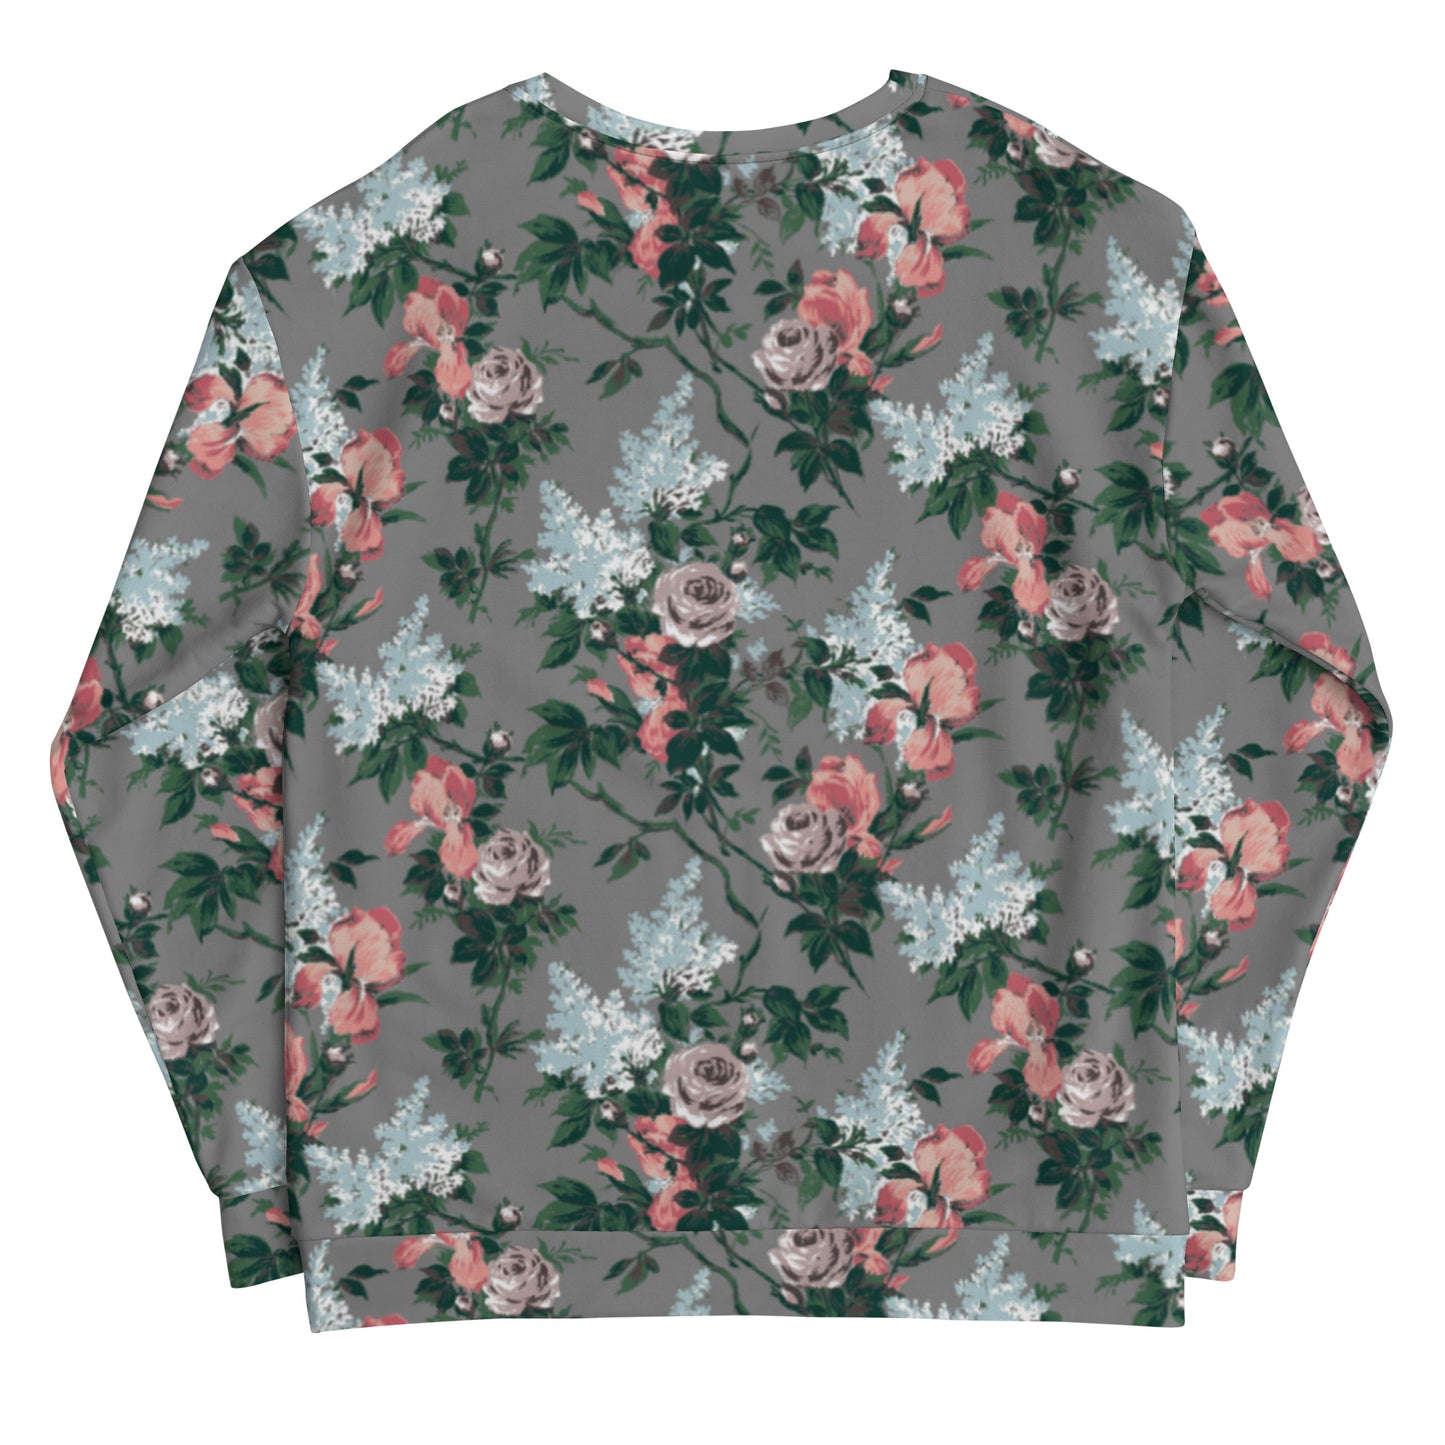 J'Adore Bella Roses Long-Sleeved Crewneck Sweatshirt | Pinup Couture Relaxed